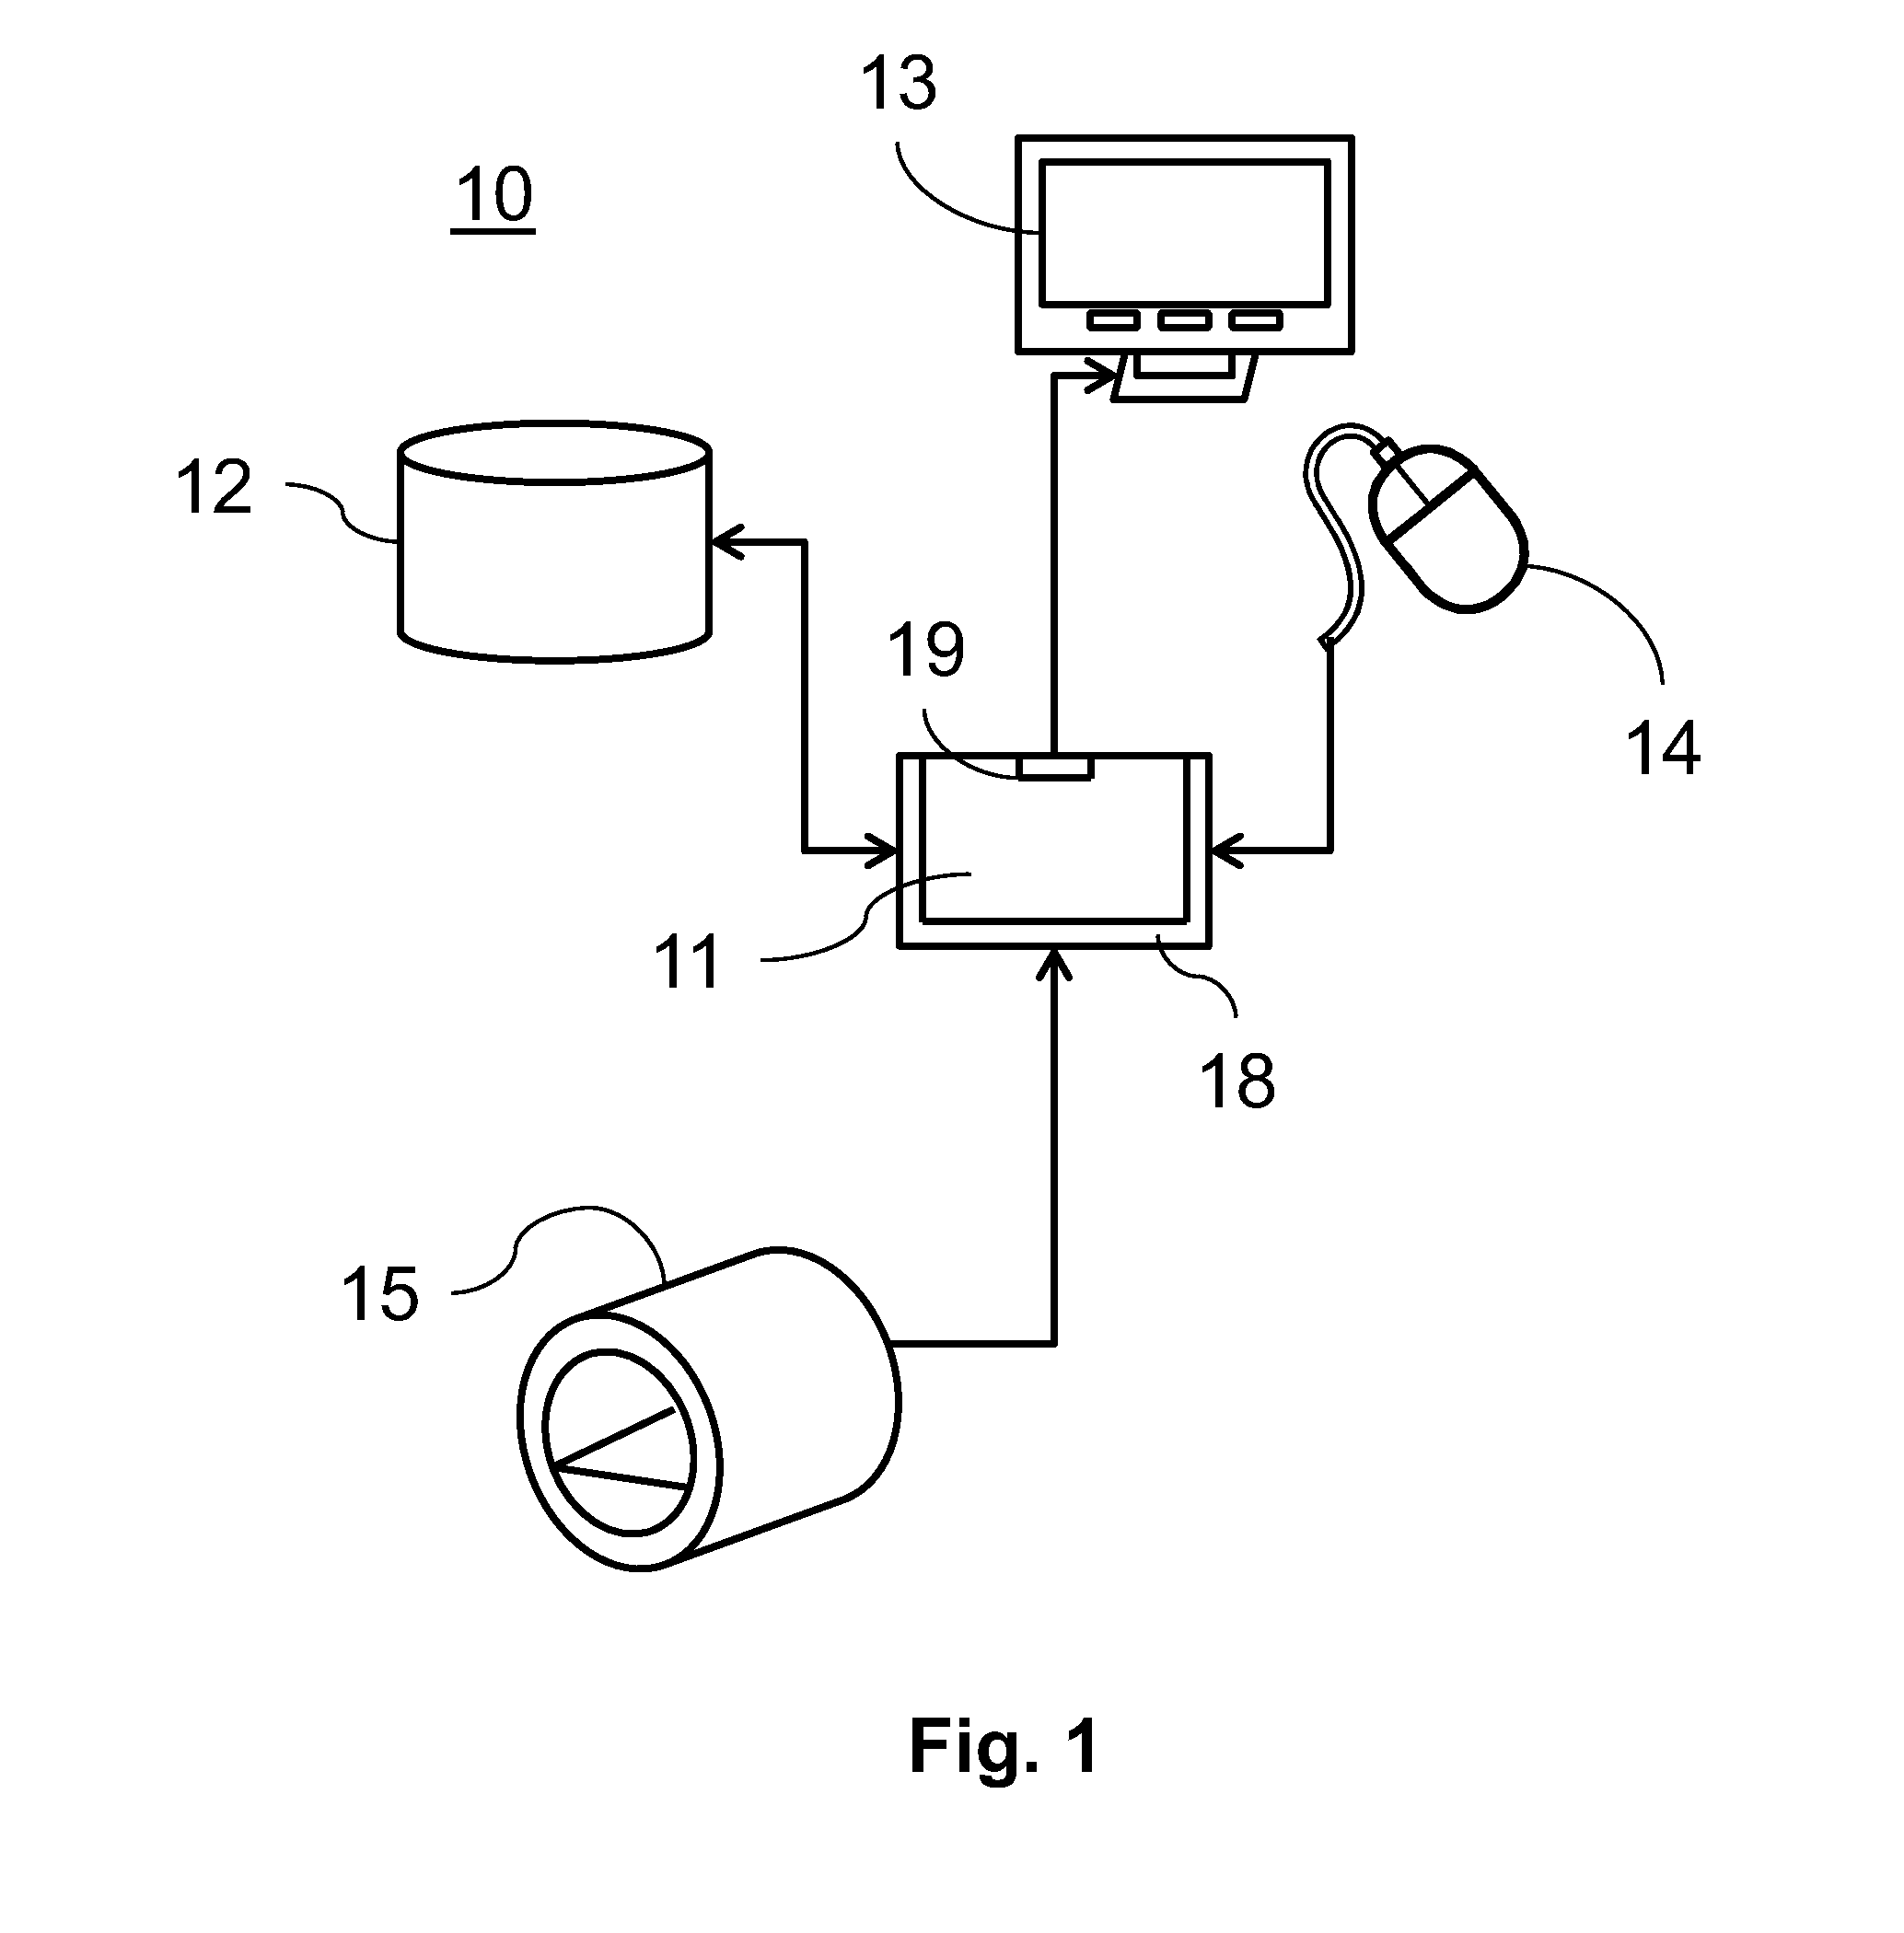 Planning System for Neurostimulation Therapy